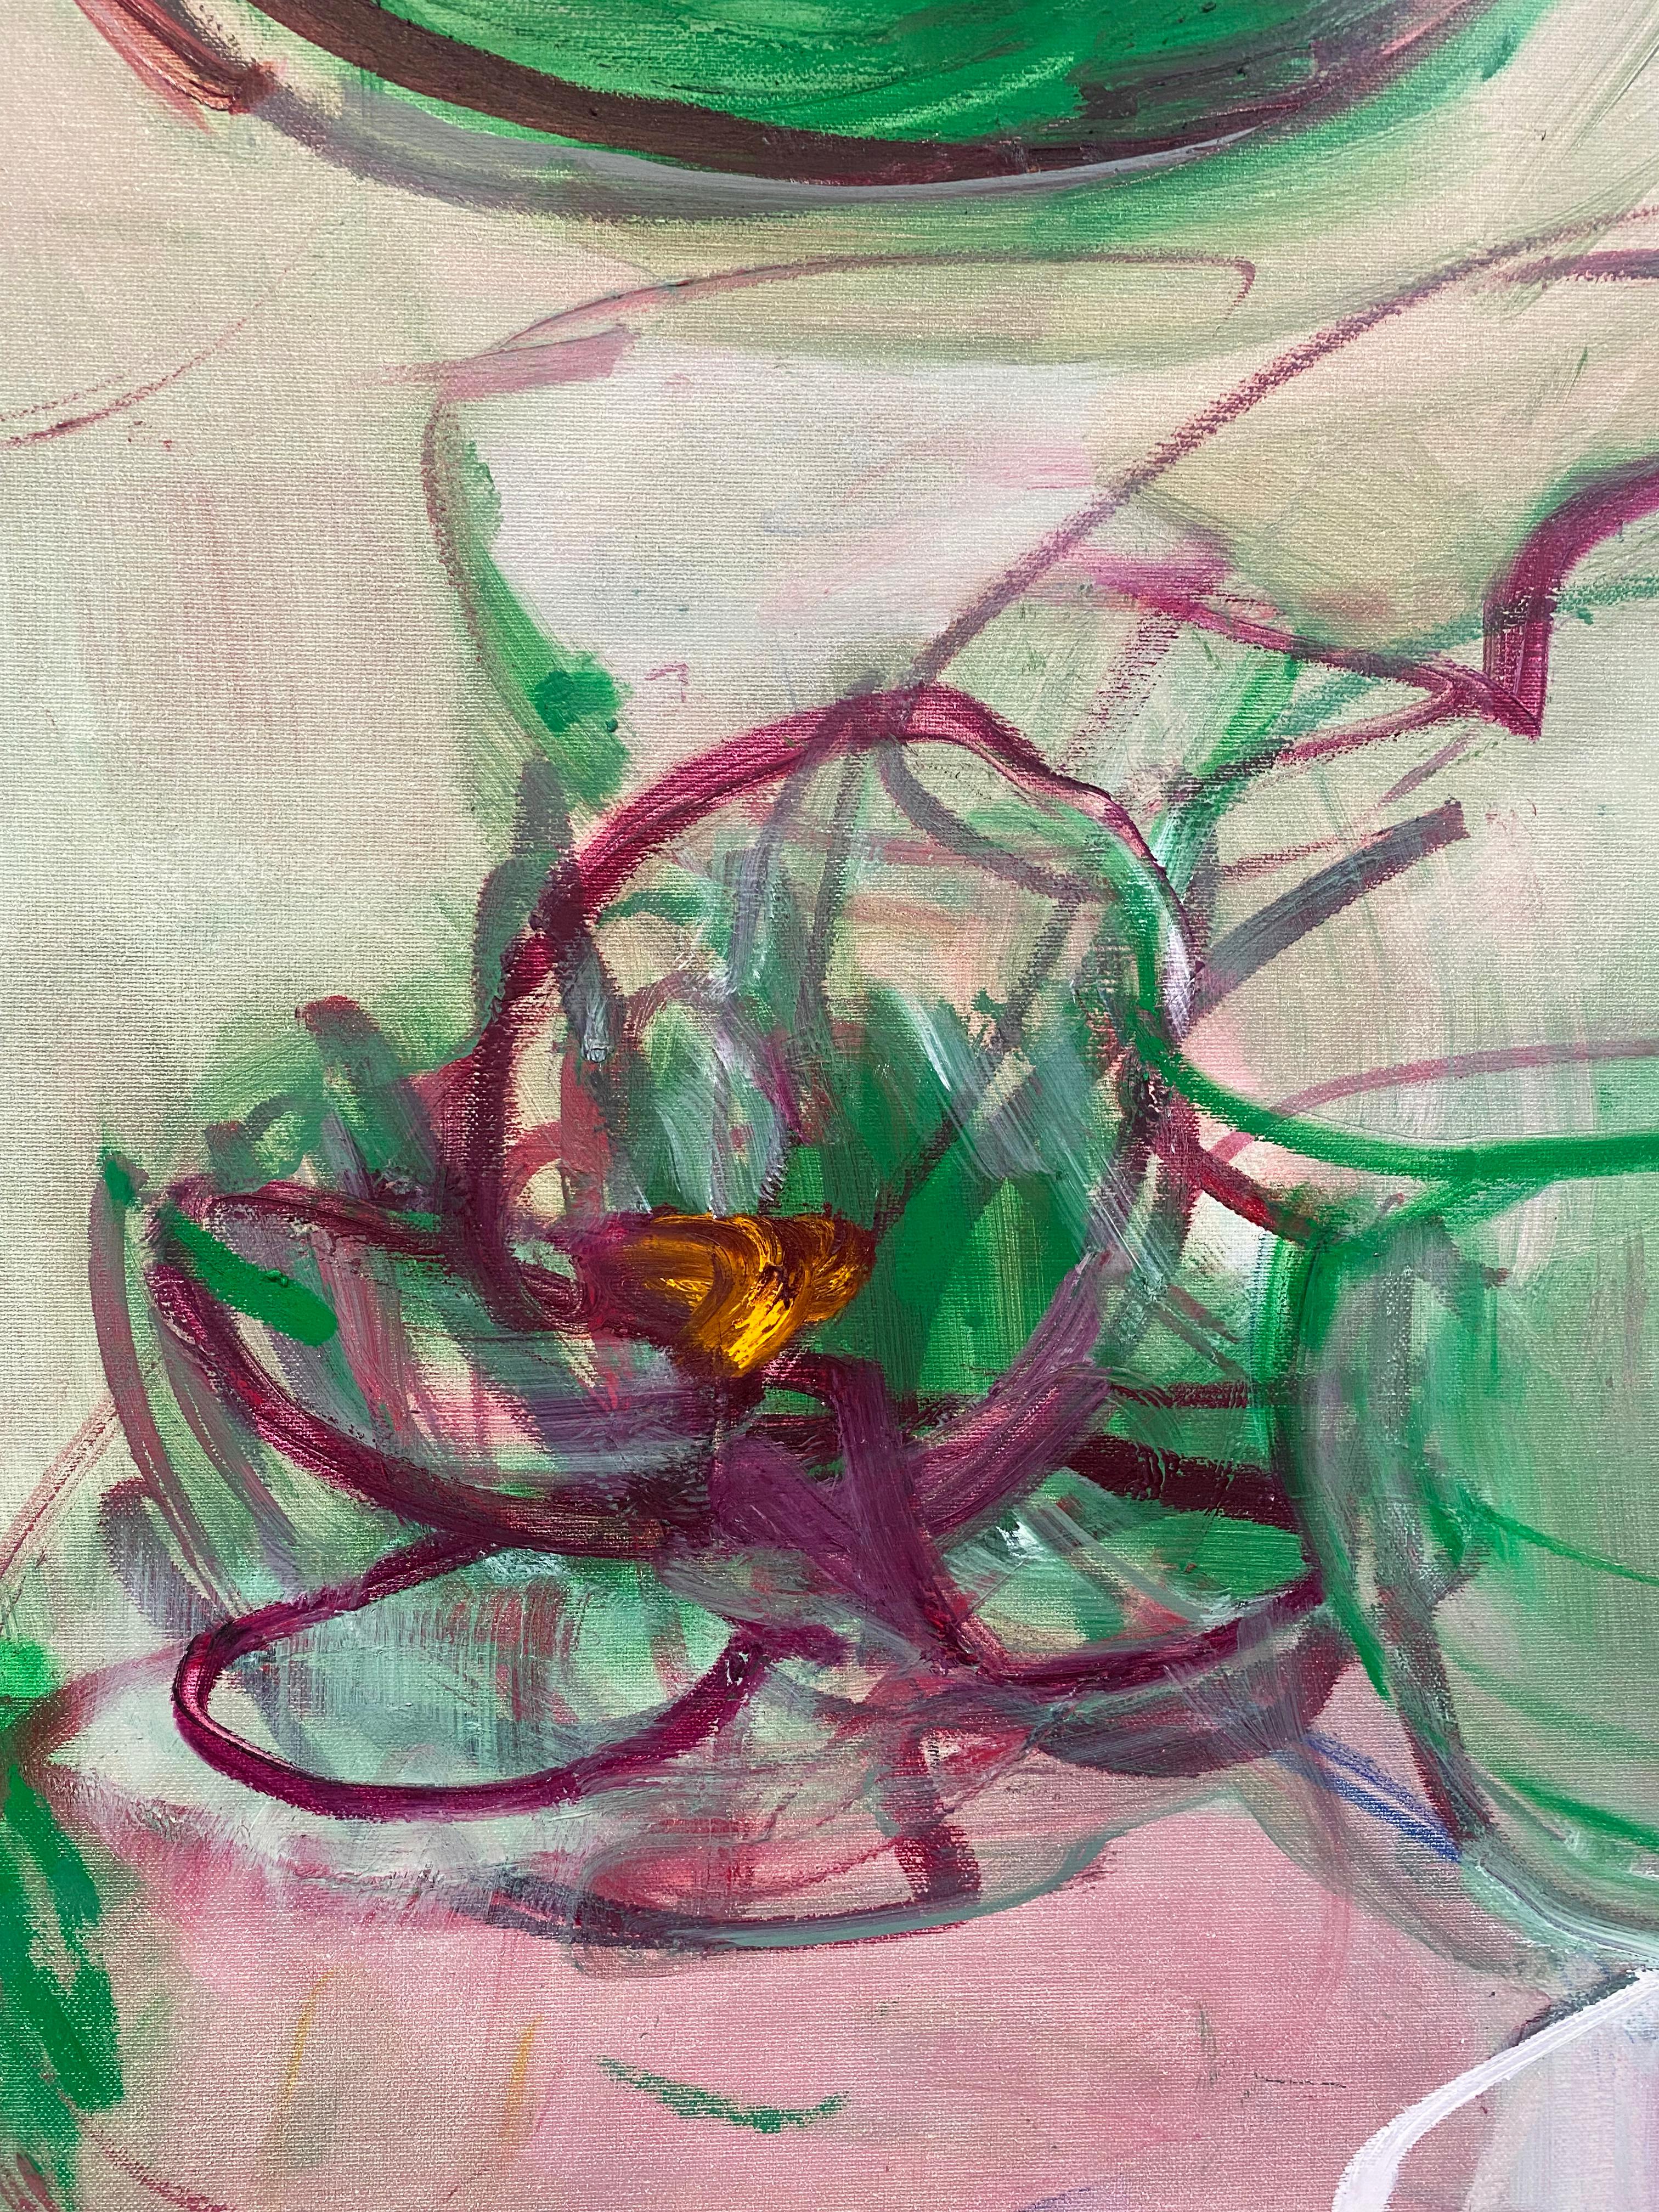 'Untitled #422' by New York City based, French artist Sandrine Kern. 2022. Oil on canvas, 30 x 70 in. This abstracted landscape painting features a pond and water lily scene in deep colors of red, pink, green, and white. 

Sandrine Kern's Water Lily